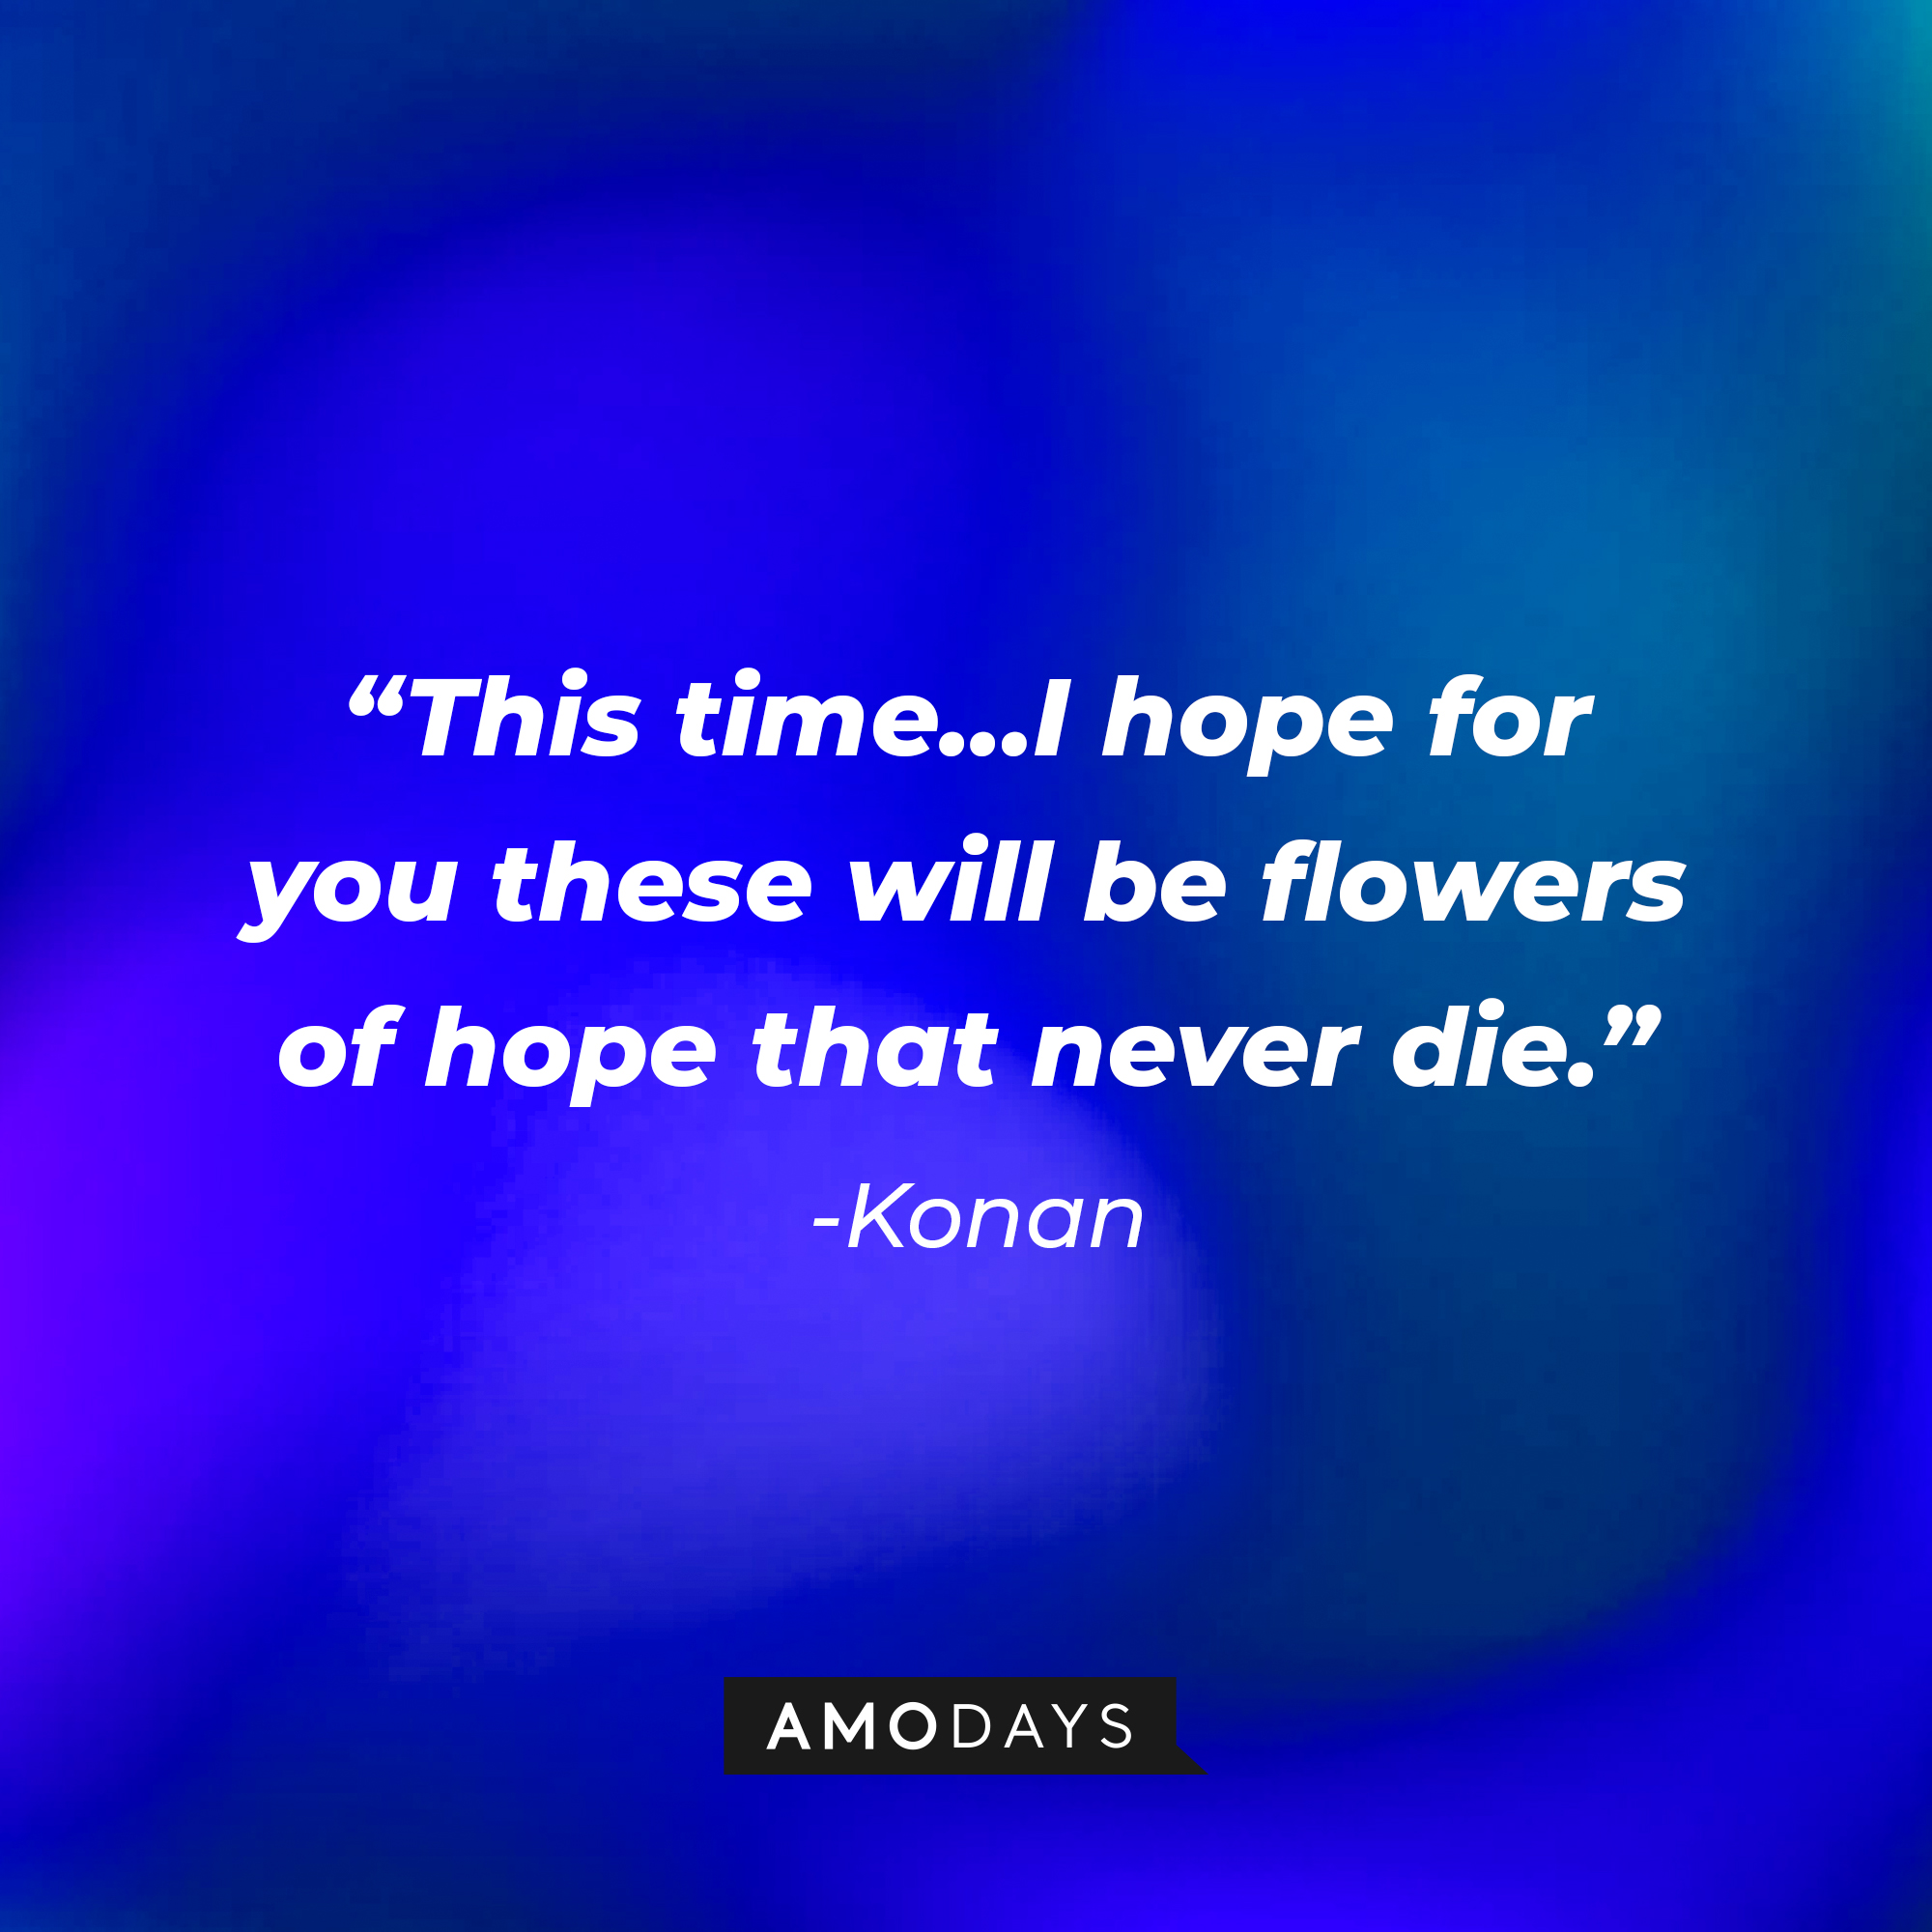 Konan’s quote: "This time…I hope for you these will be flowers of hope that never die." | Source: AmoDays